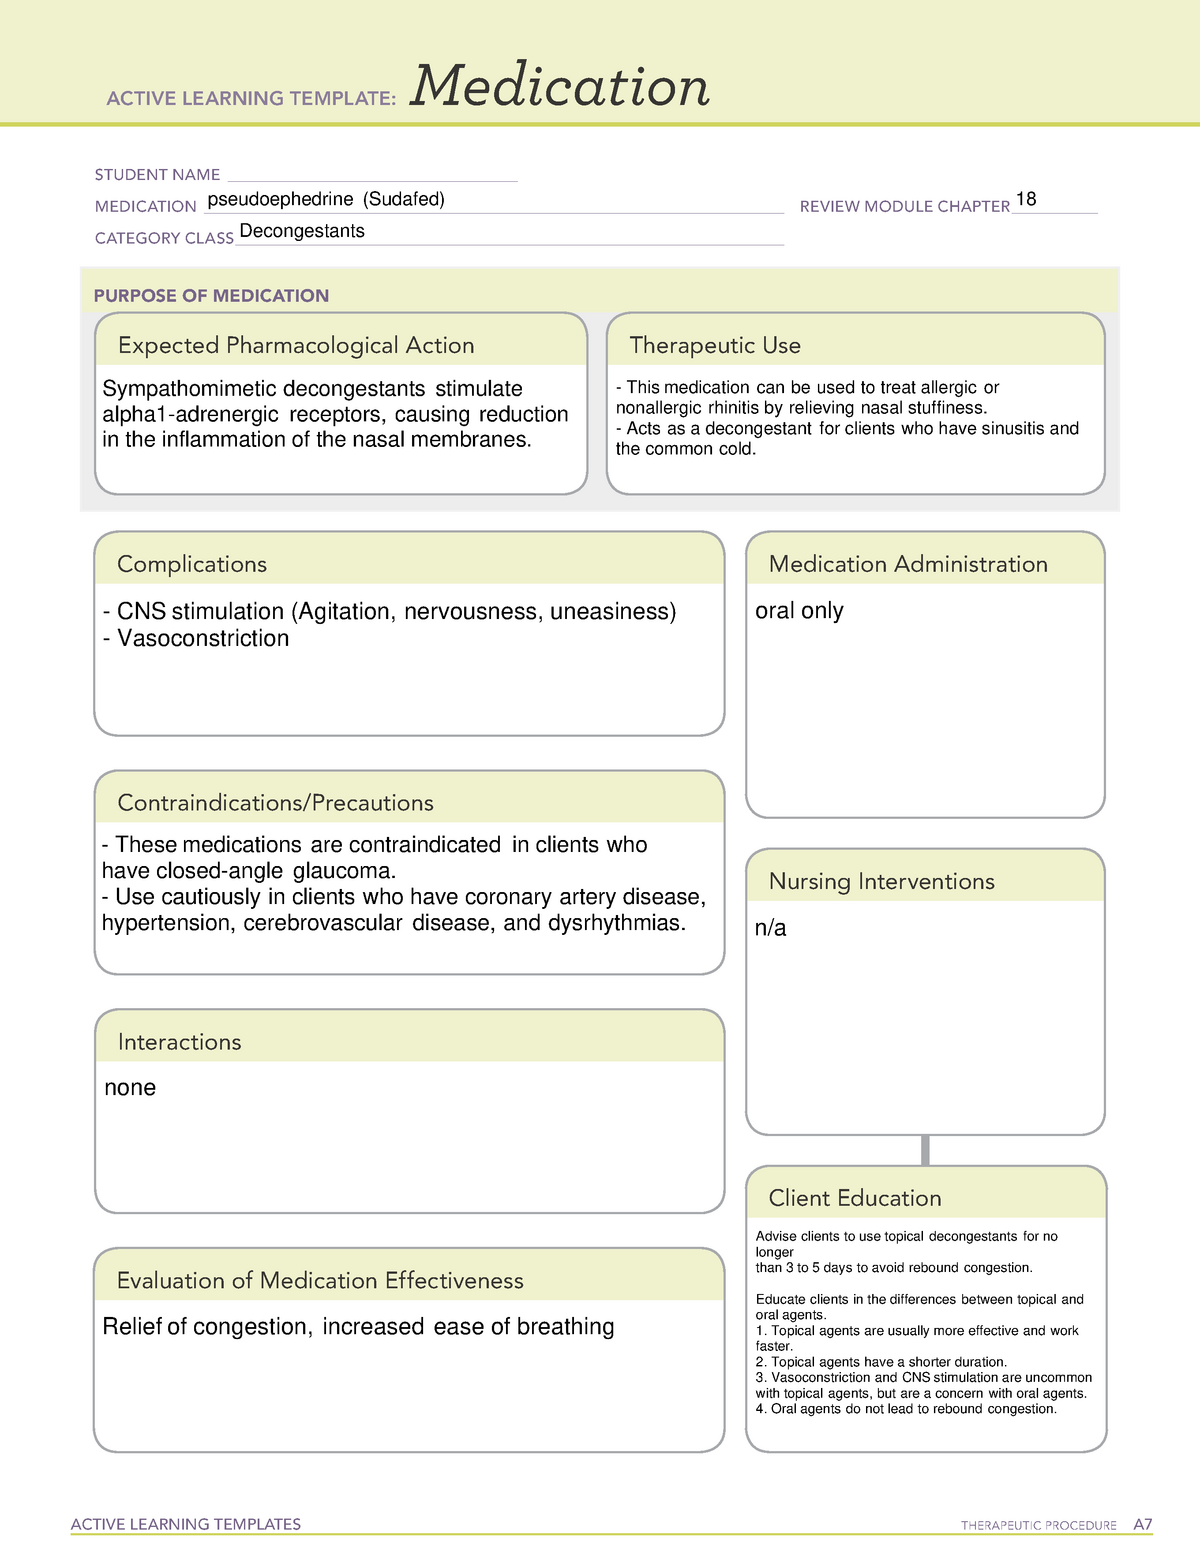 pseudoephedrine-sudafed-active-learning-templates-therapeutic